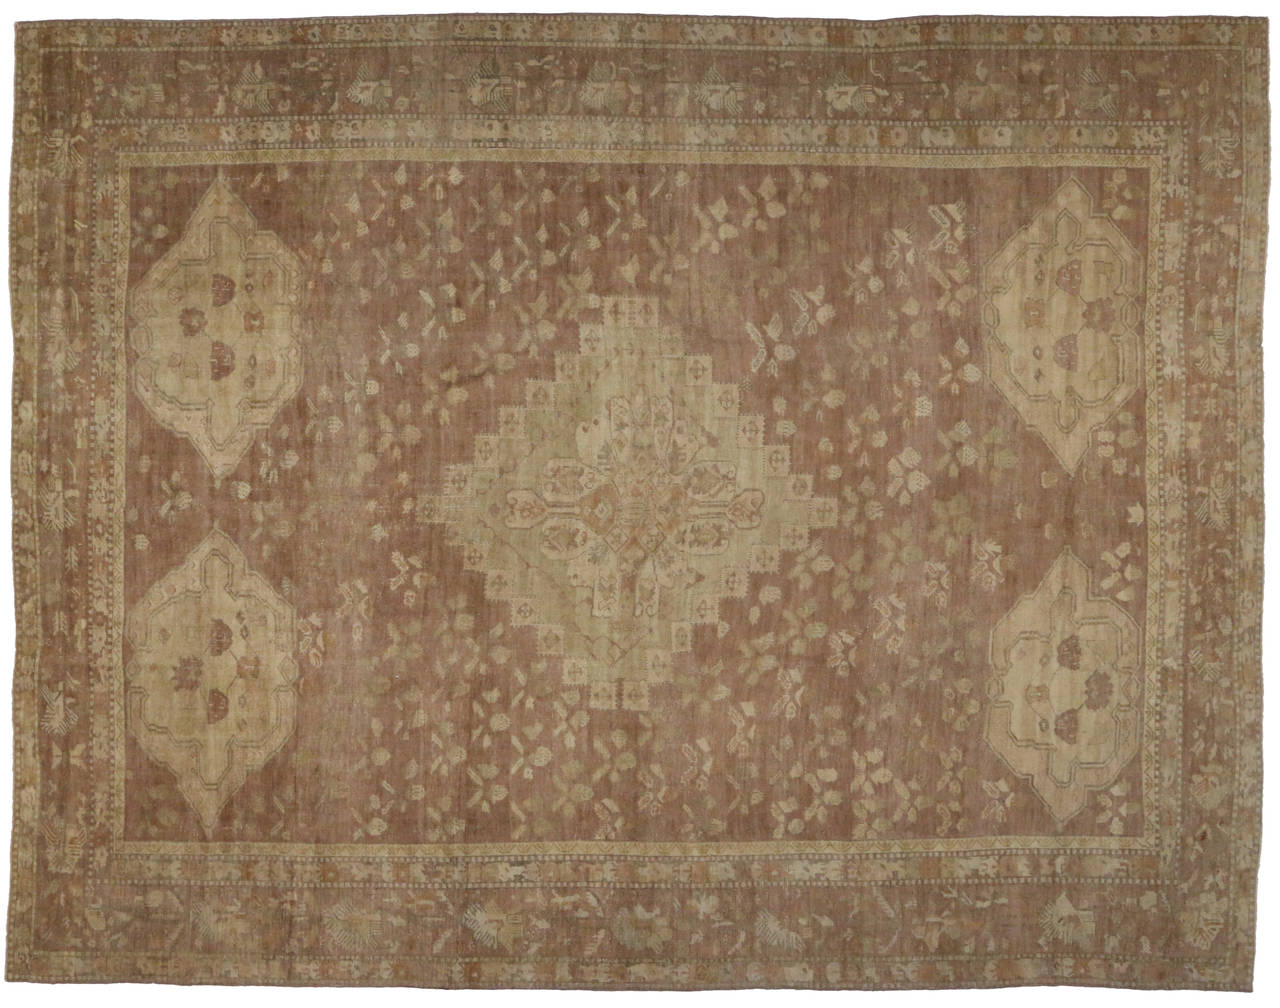 Oversized Antique Turkish Oushak Rug, Earth-Tone Elegance Meets Timeless Style In Good Condition For Sale In Dallas, TX